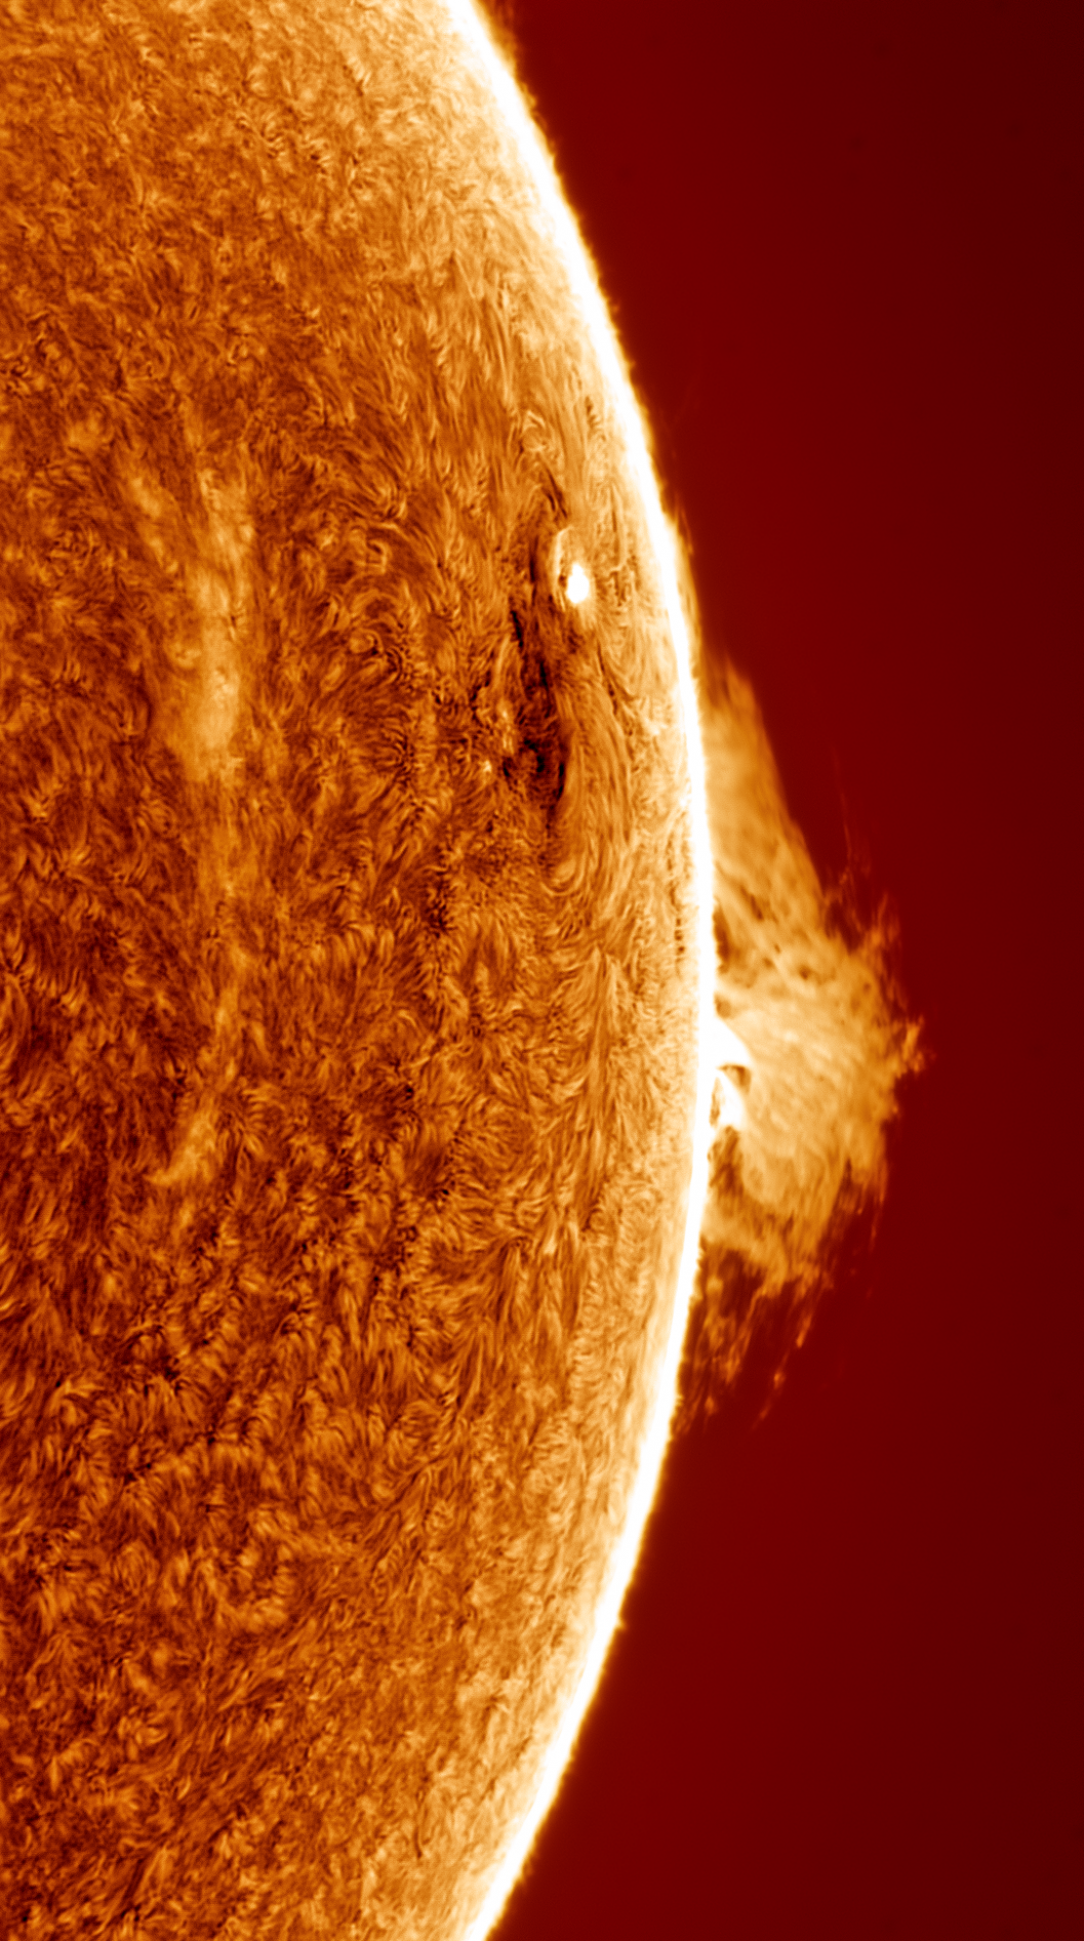 Prominence, sunspot and a filament